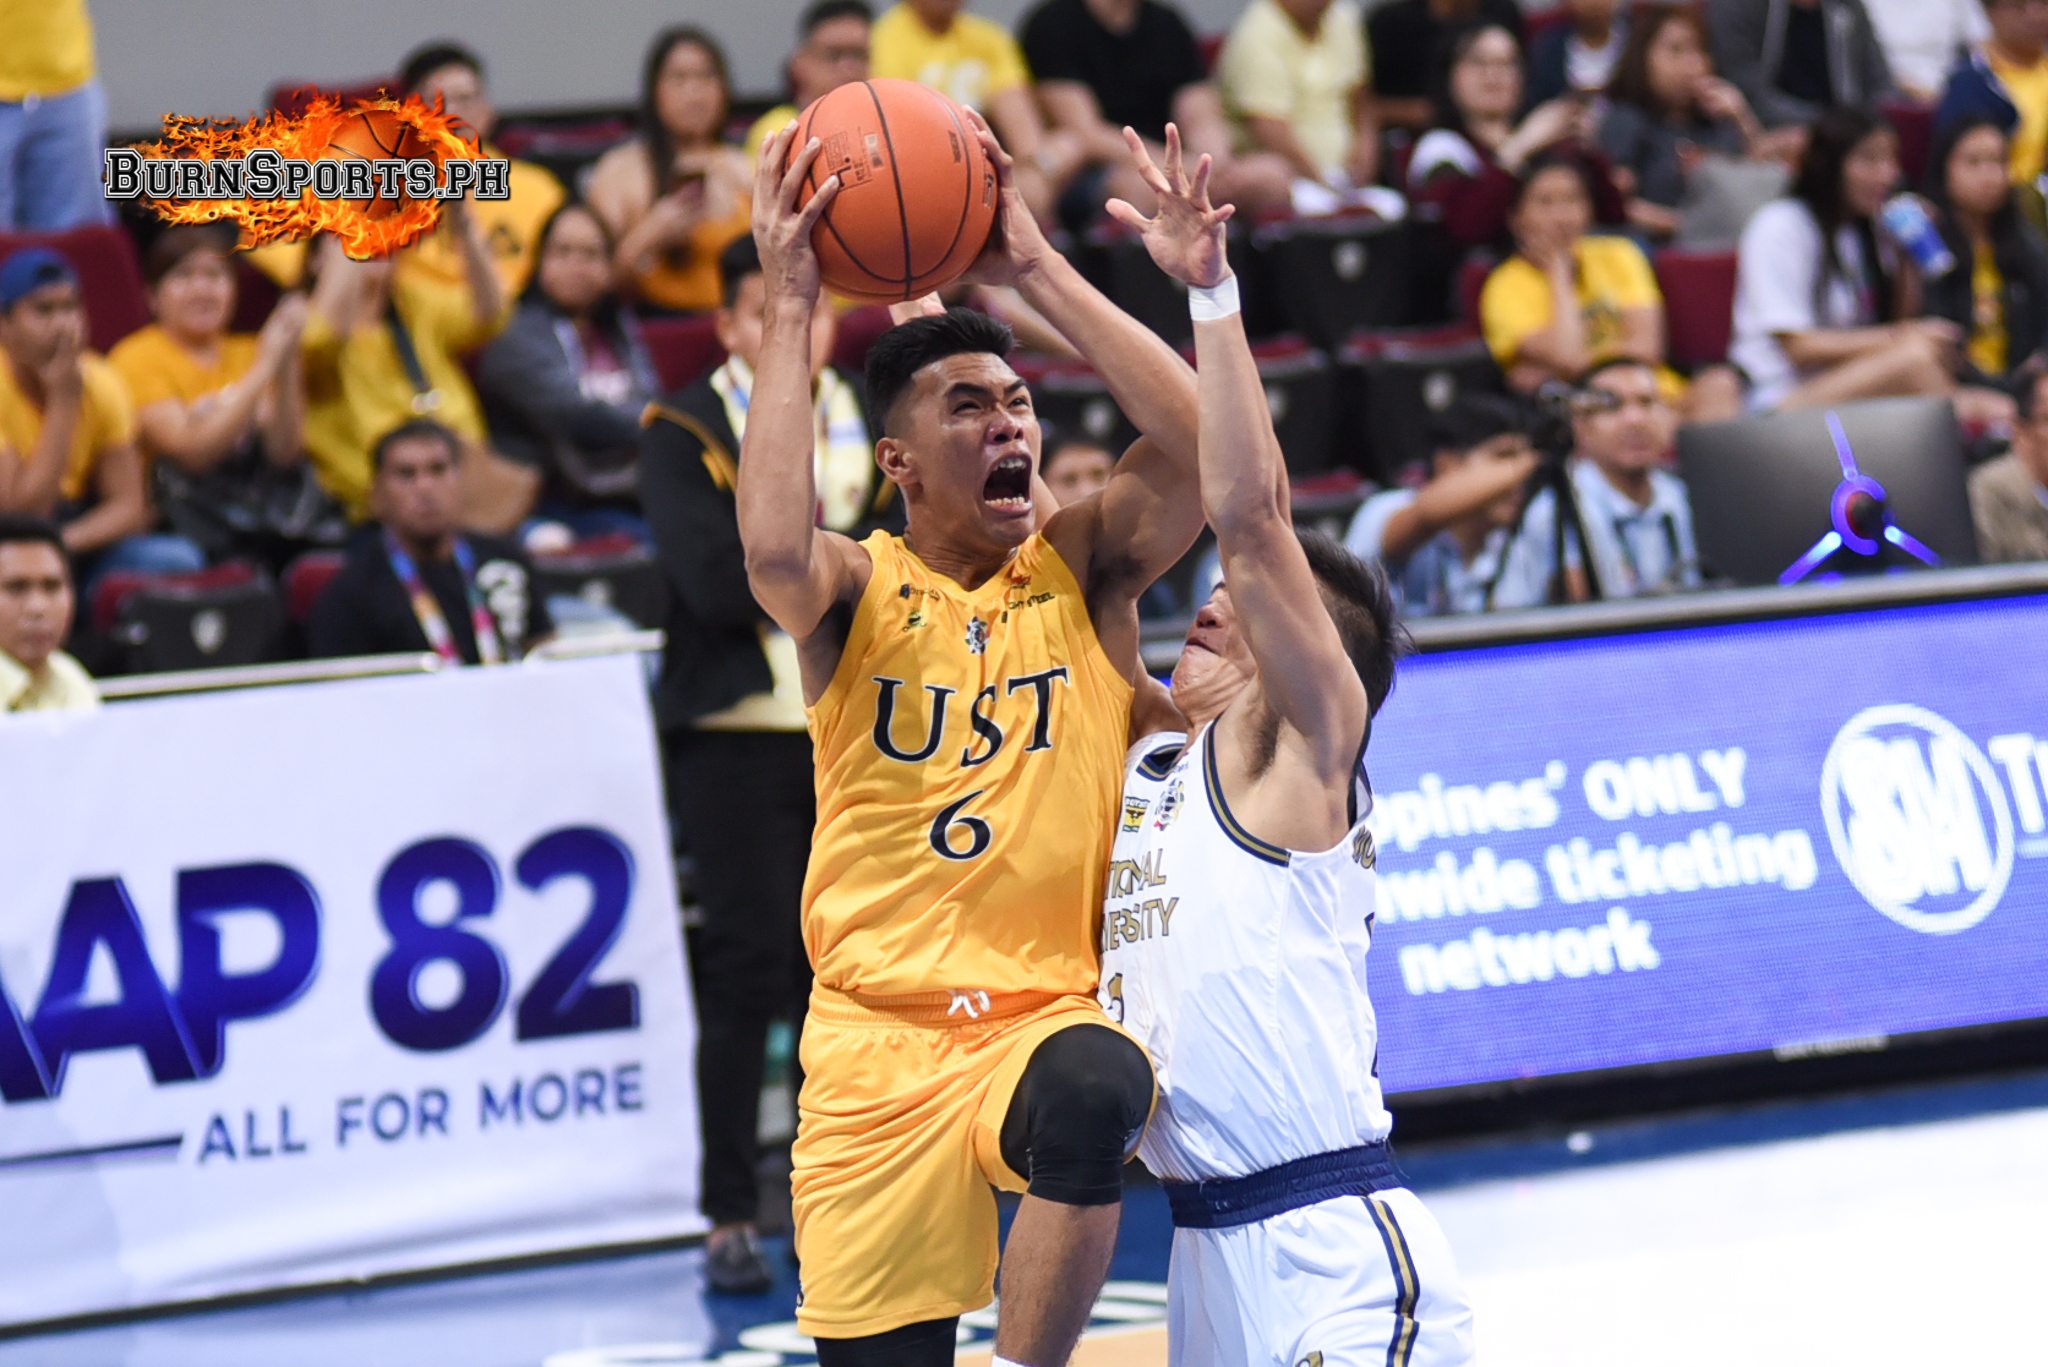 UST exodus continues as Nonoy, Cuajao transfer to La Salle